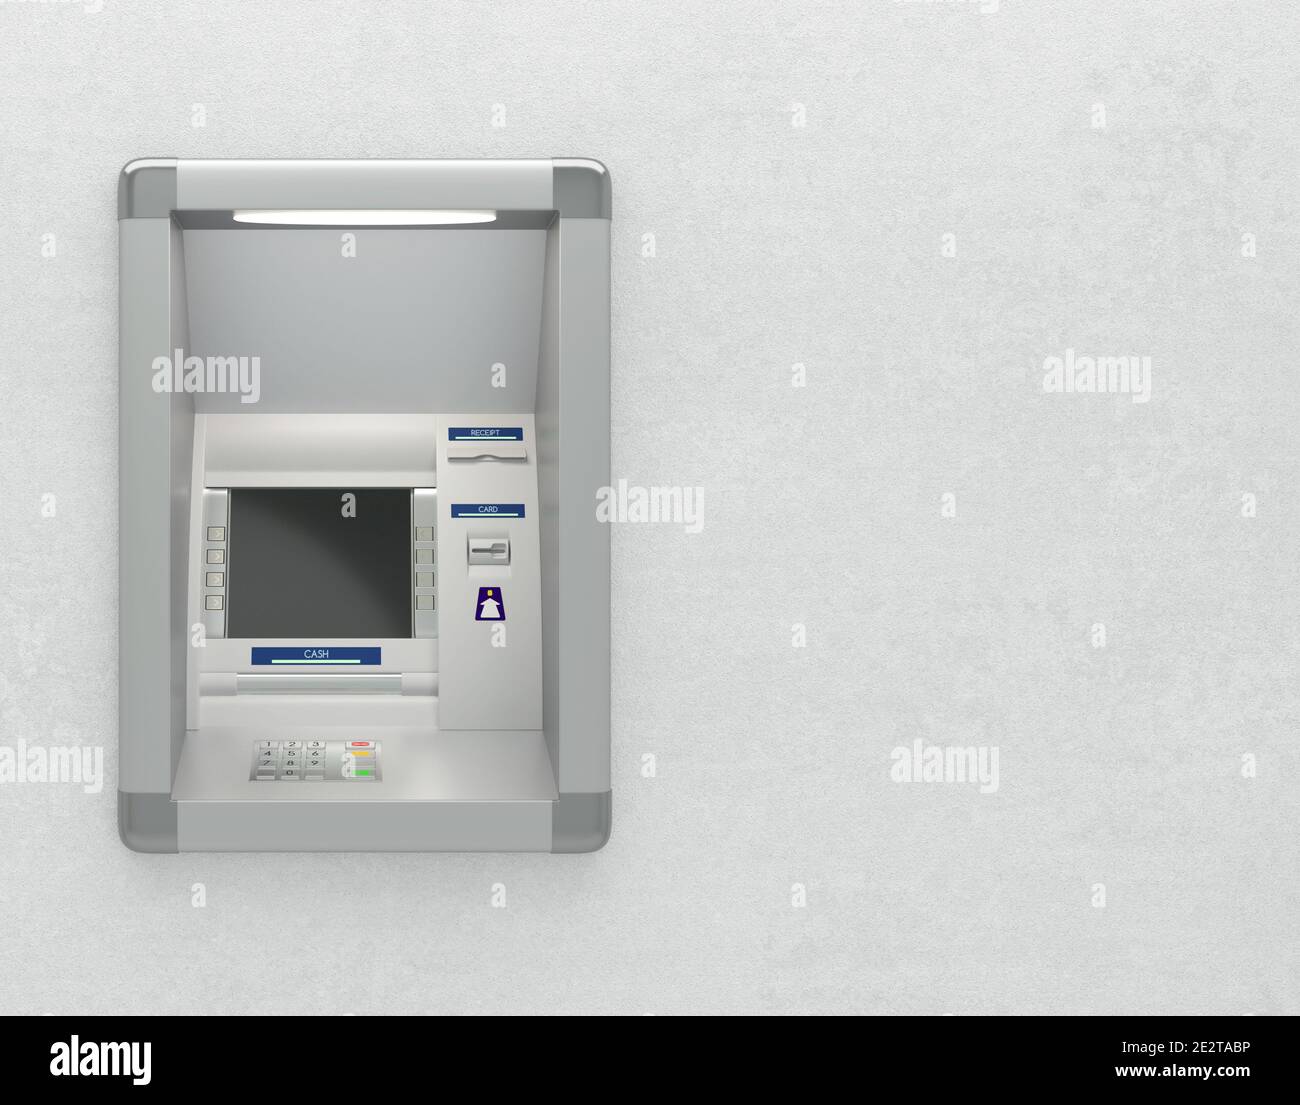 Atm machine with a card reader. Pin code safety, bank account access automatic banking, electronic cash withdrawal, concept. Display screen, buttons, Stock Photo